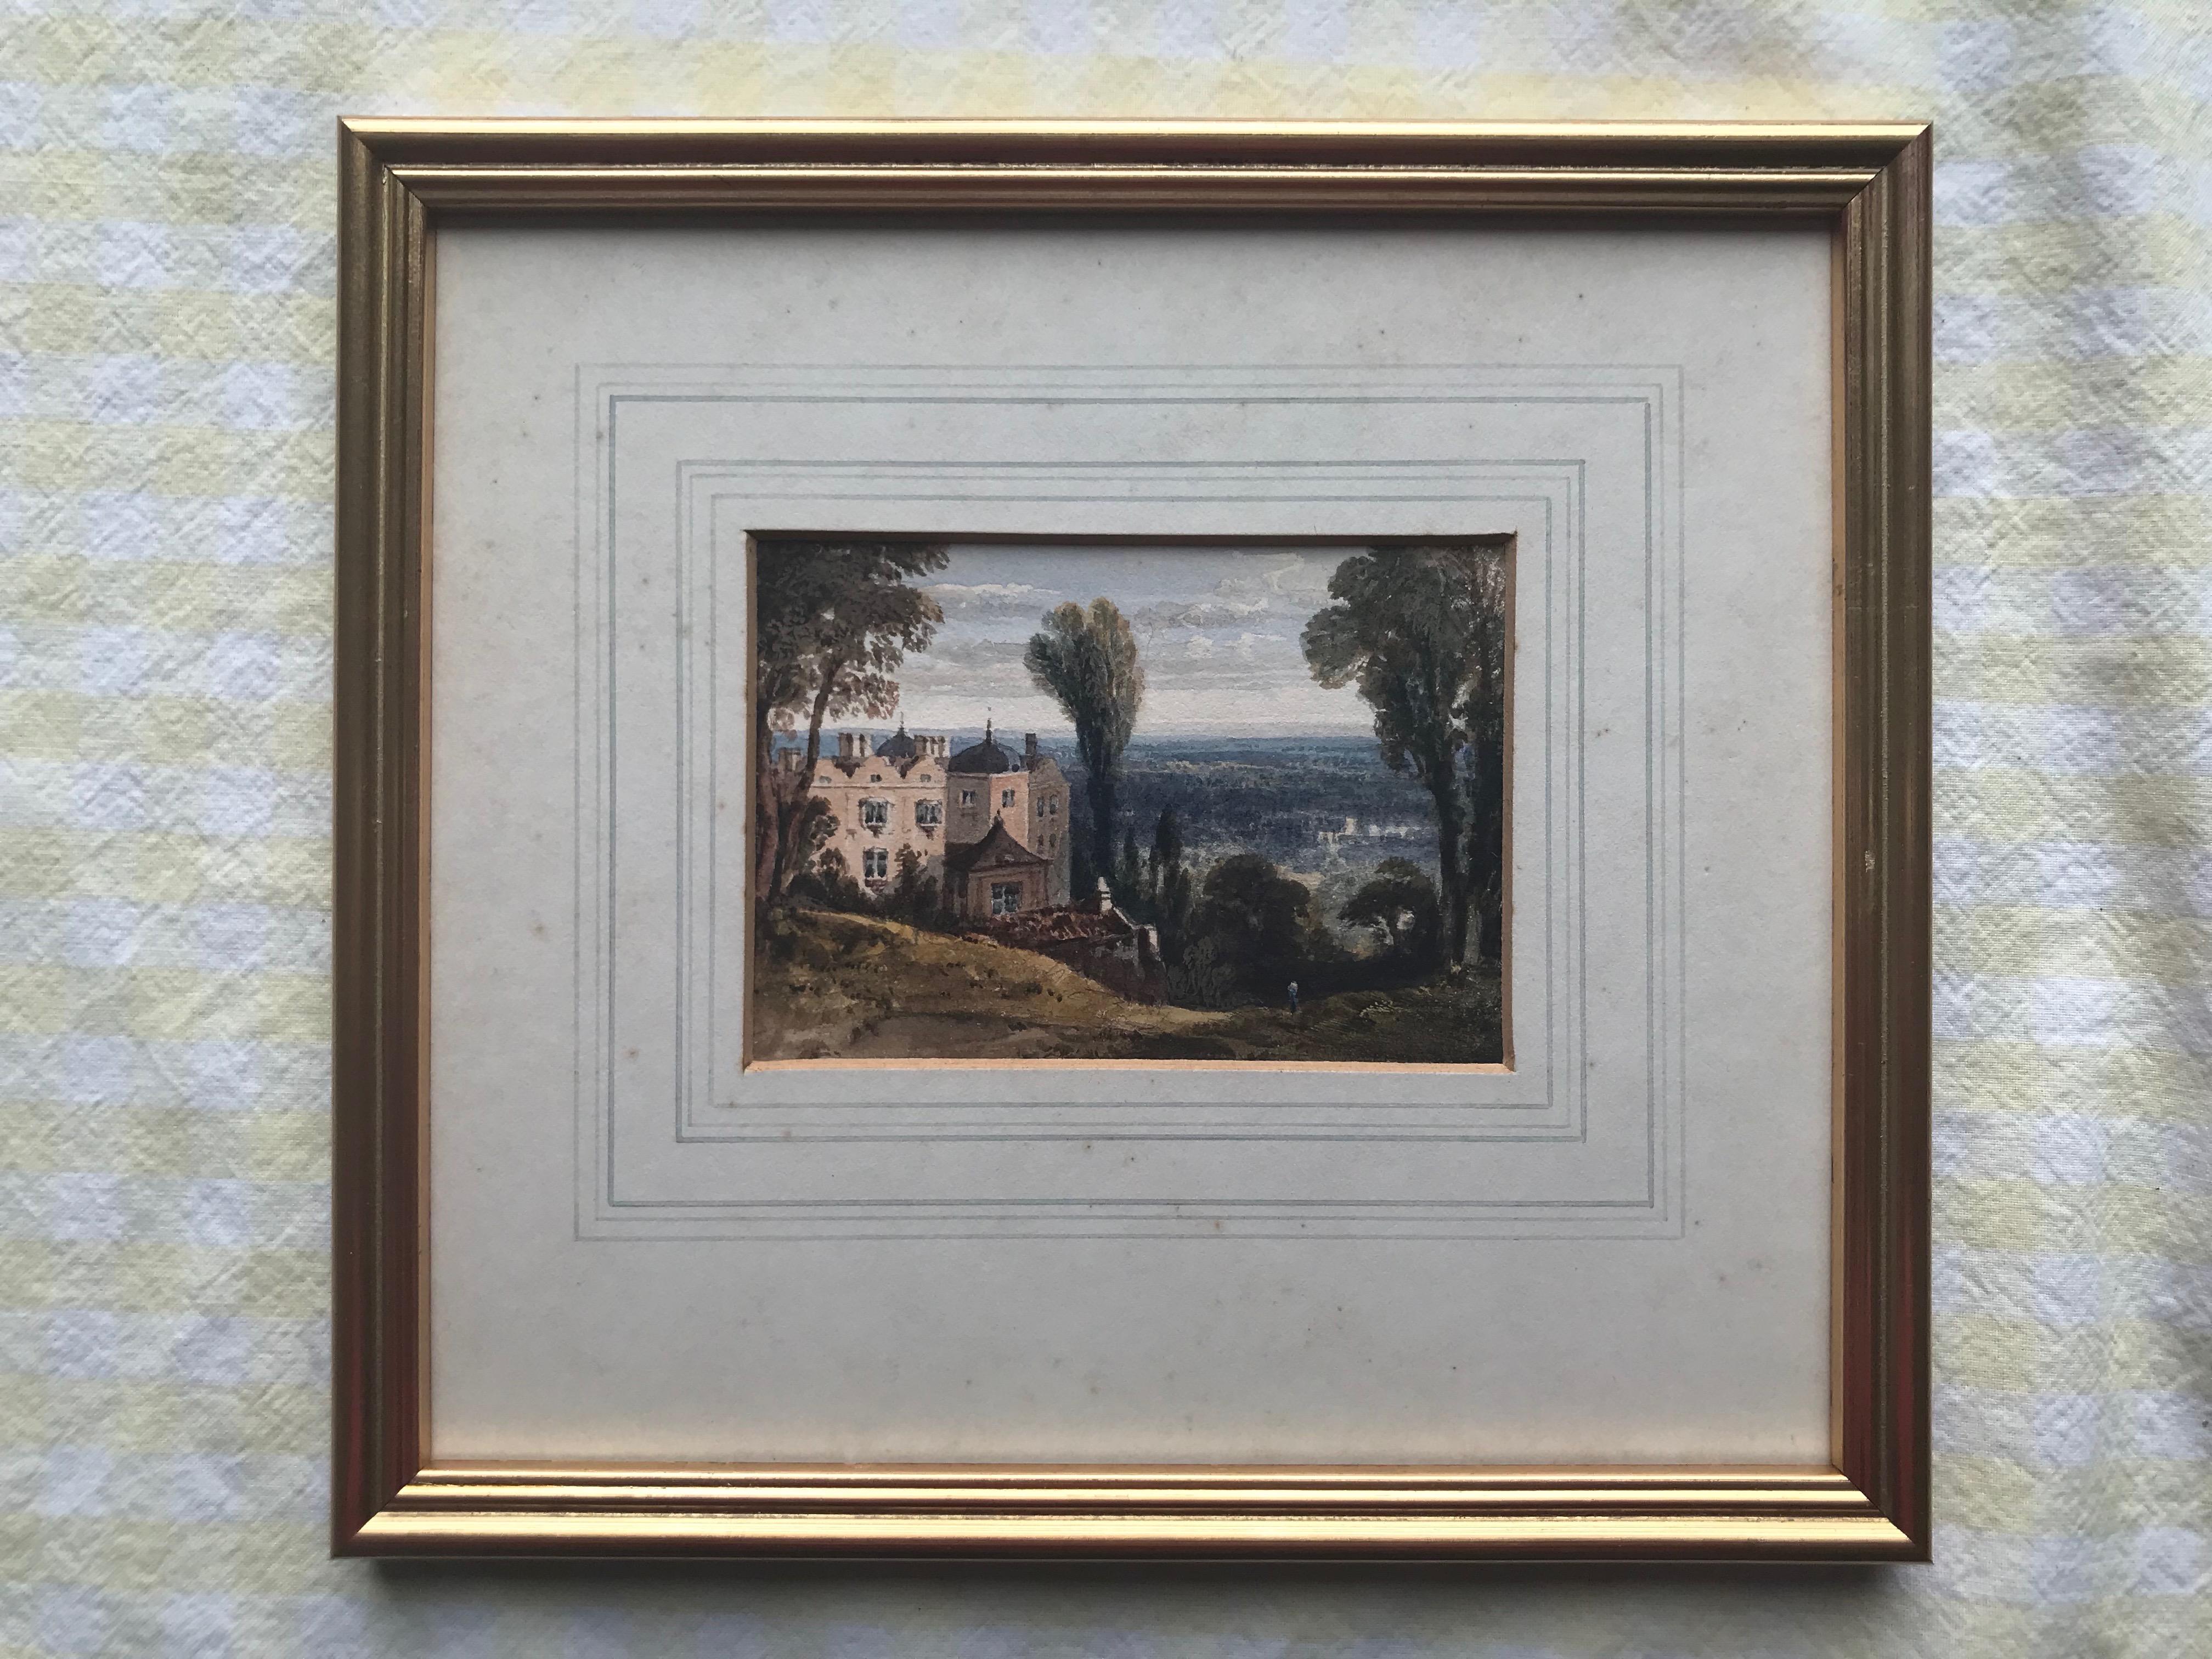 William Crouch (active 1817-1850)
A view of a country house, Yalding Downs, Kent
Inscribed verso
Watercolour 
3 x 4½
8¼ x 9¼ inches with frame

William Crouch was a prolific artist working in the early to mid 19th century. His pleasing compositions